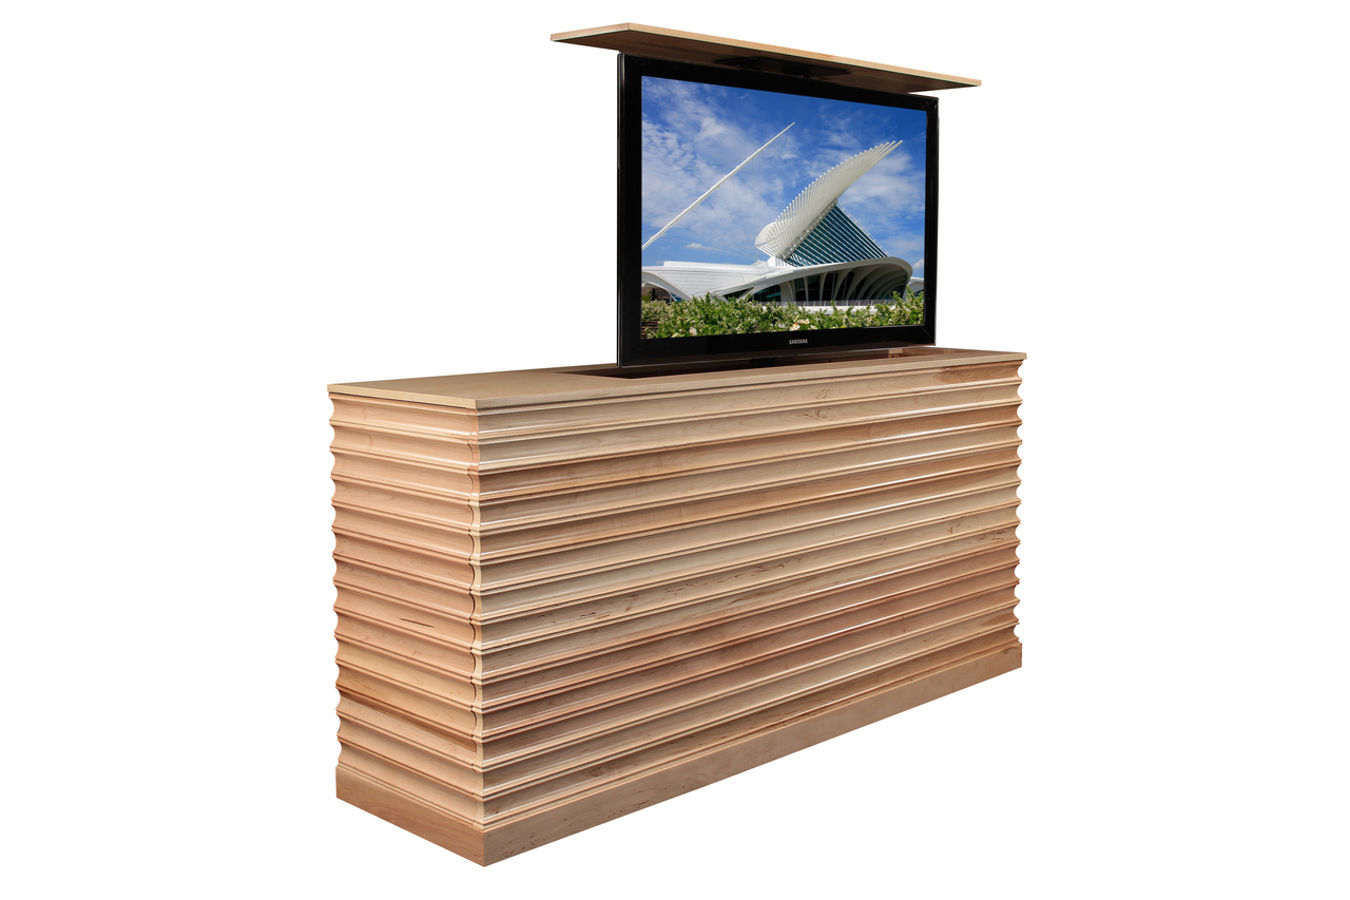 Accord Maple Tv Lift Cabinet, End Of Bed Tv Lift Cabinets For Flat Screens Uk